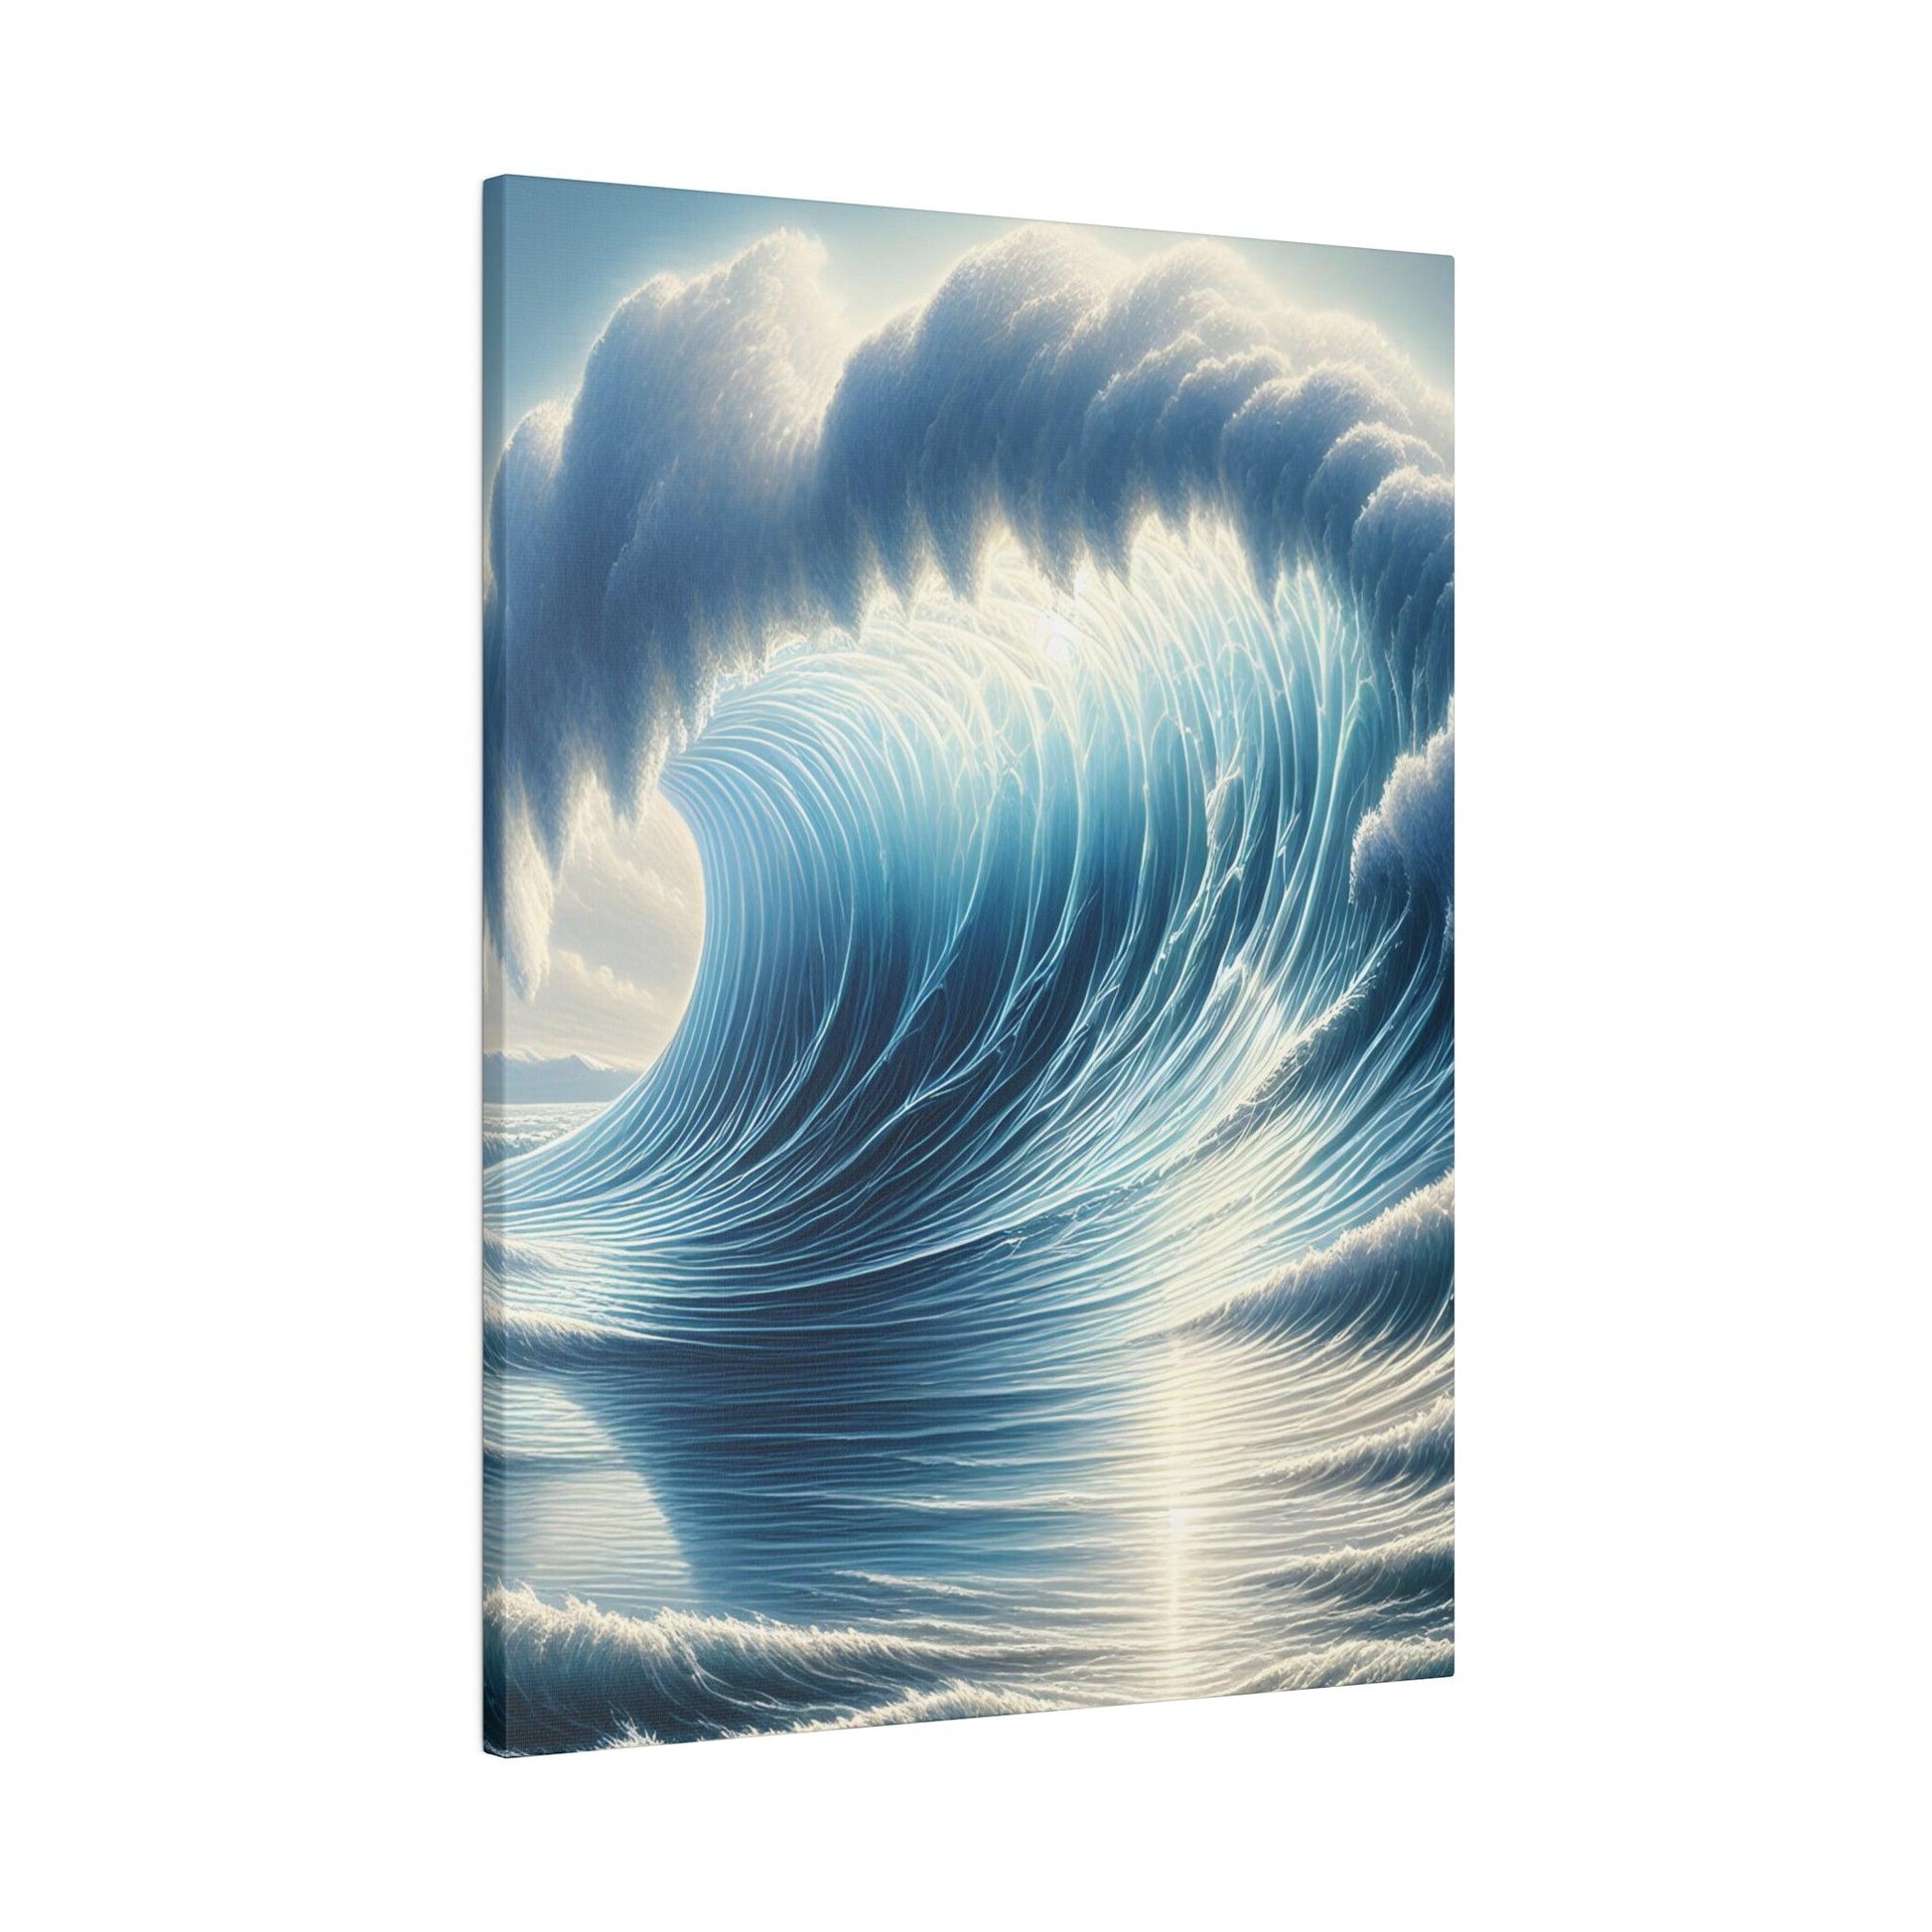 "AquaMaster - Symphony of the Waves Canvas Wall Art" - The Alice Gallery